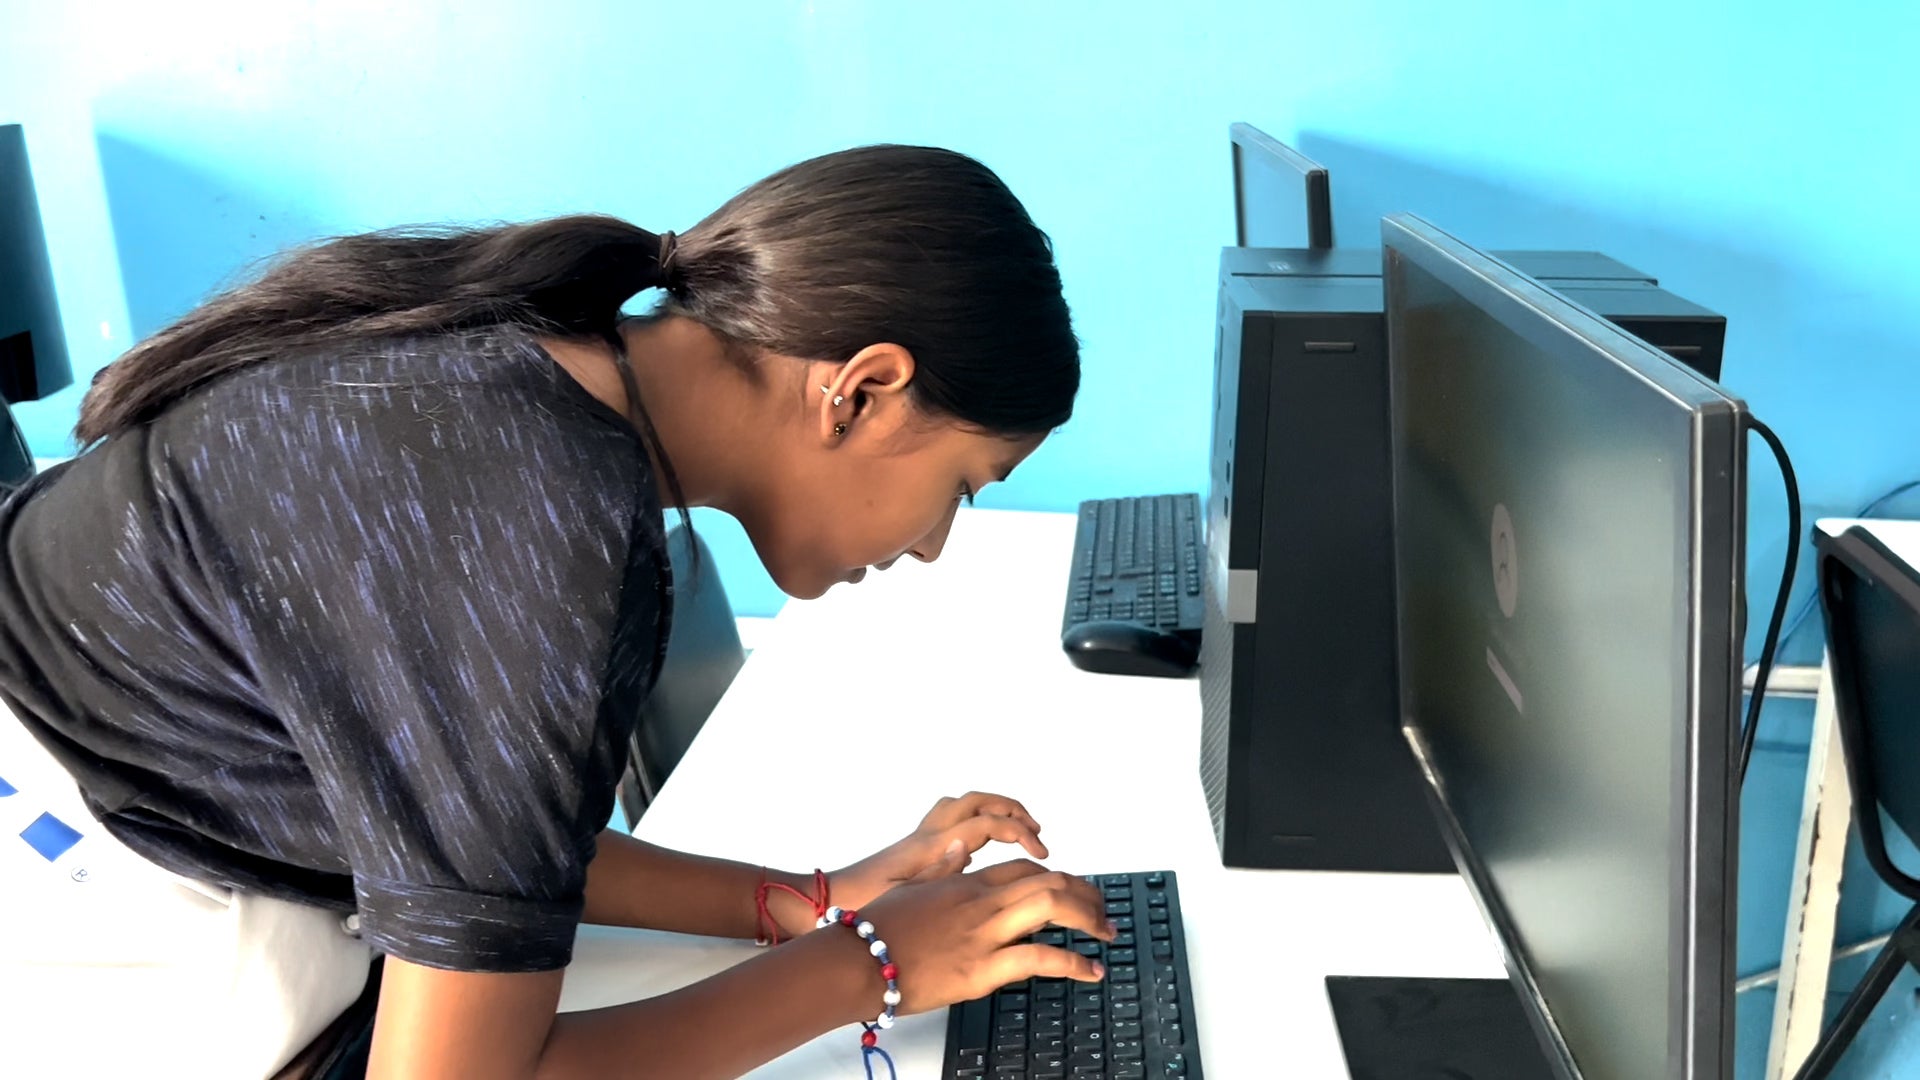 In Honduras, a young girl, Samantha, works at her computer. 